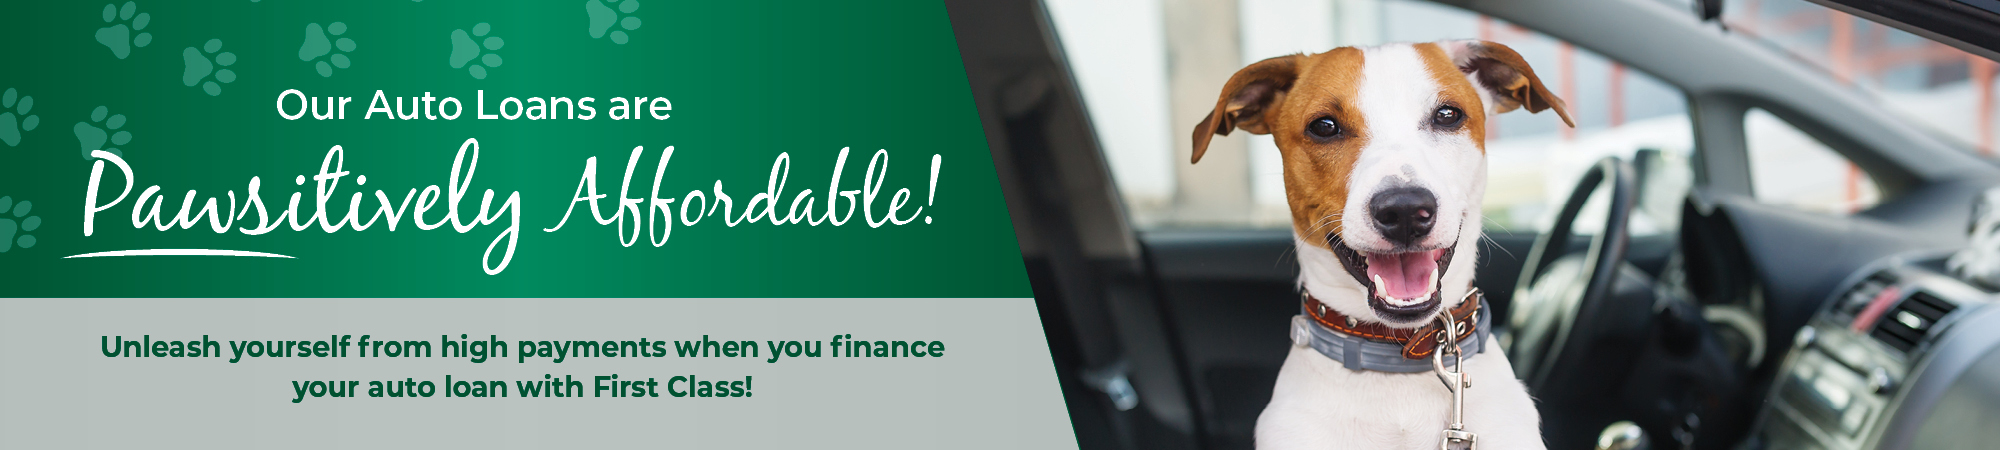 Our Auto Loans are Pawsitively Affordable! Unleash yourself from high payments when you finance your auto loan with First Class!